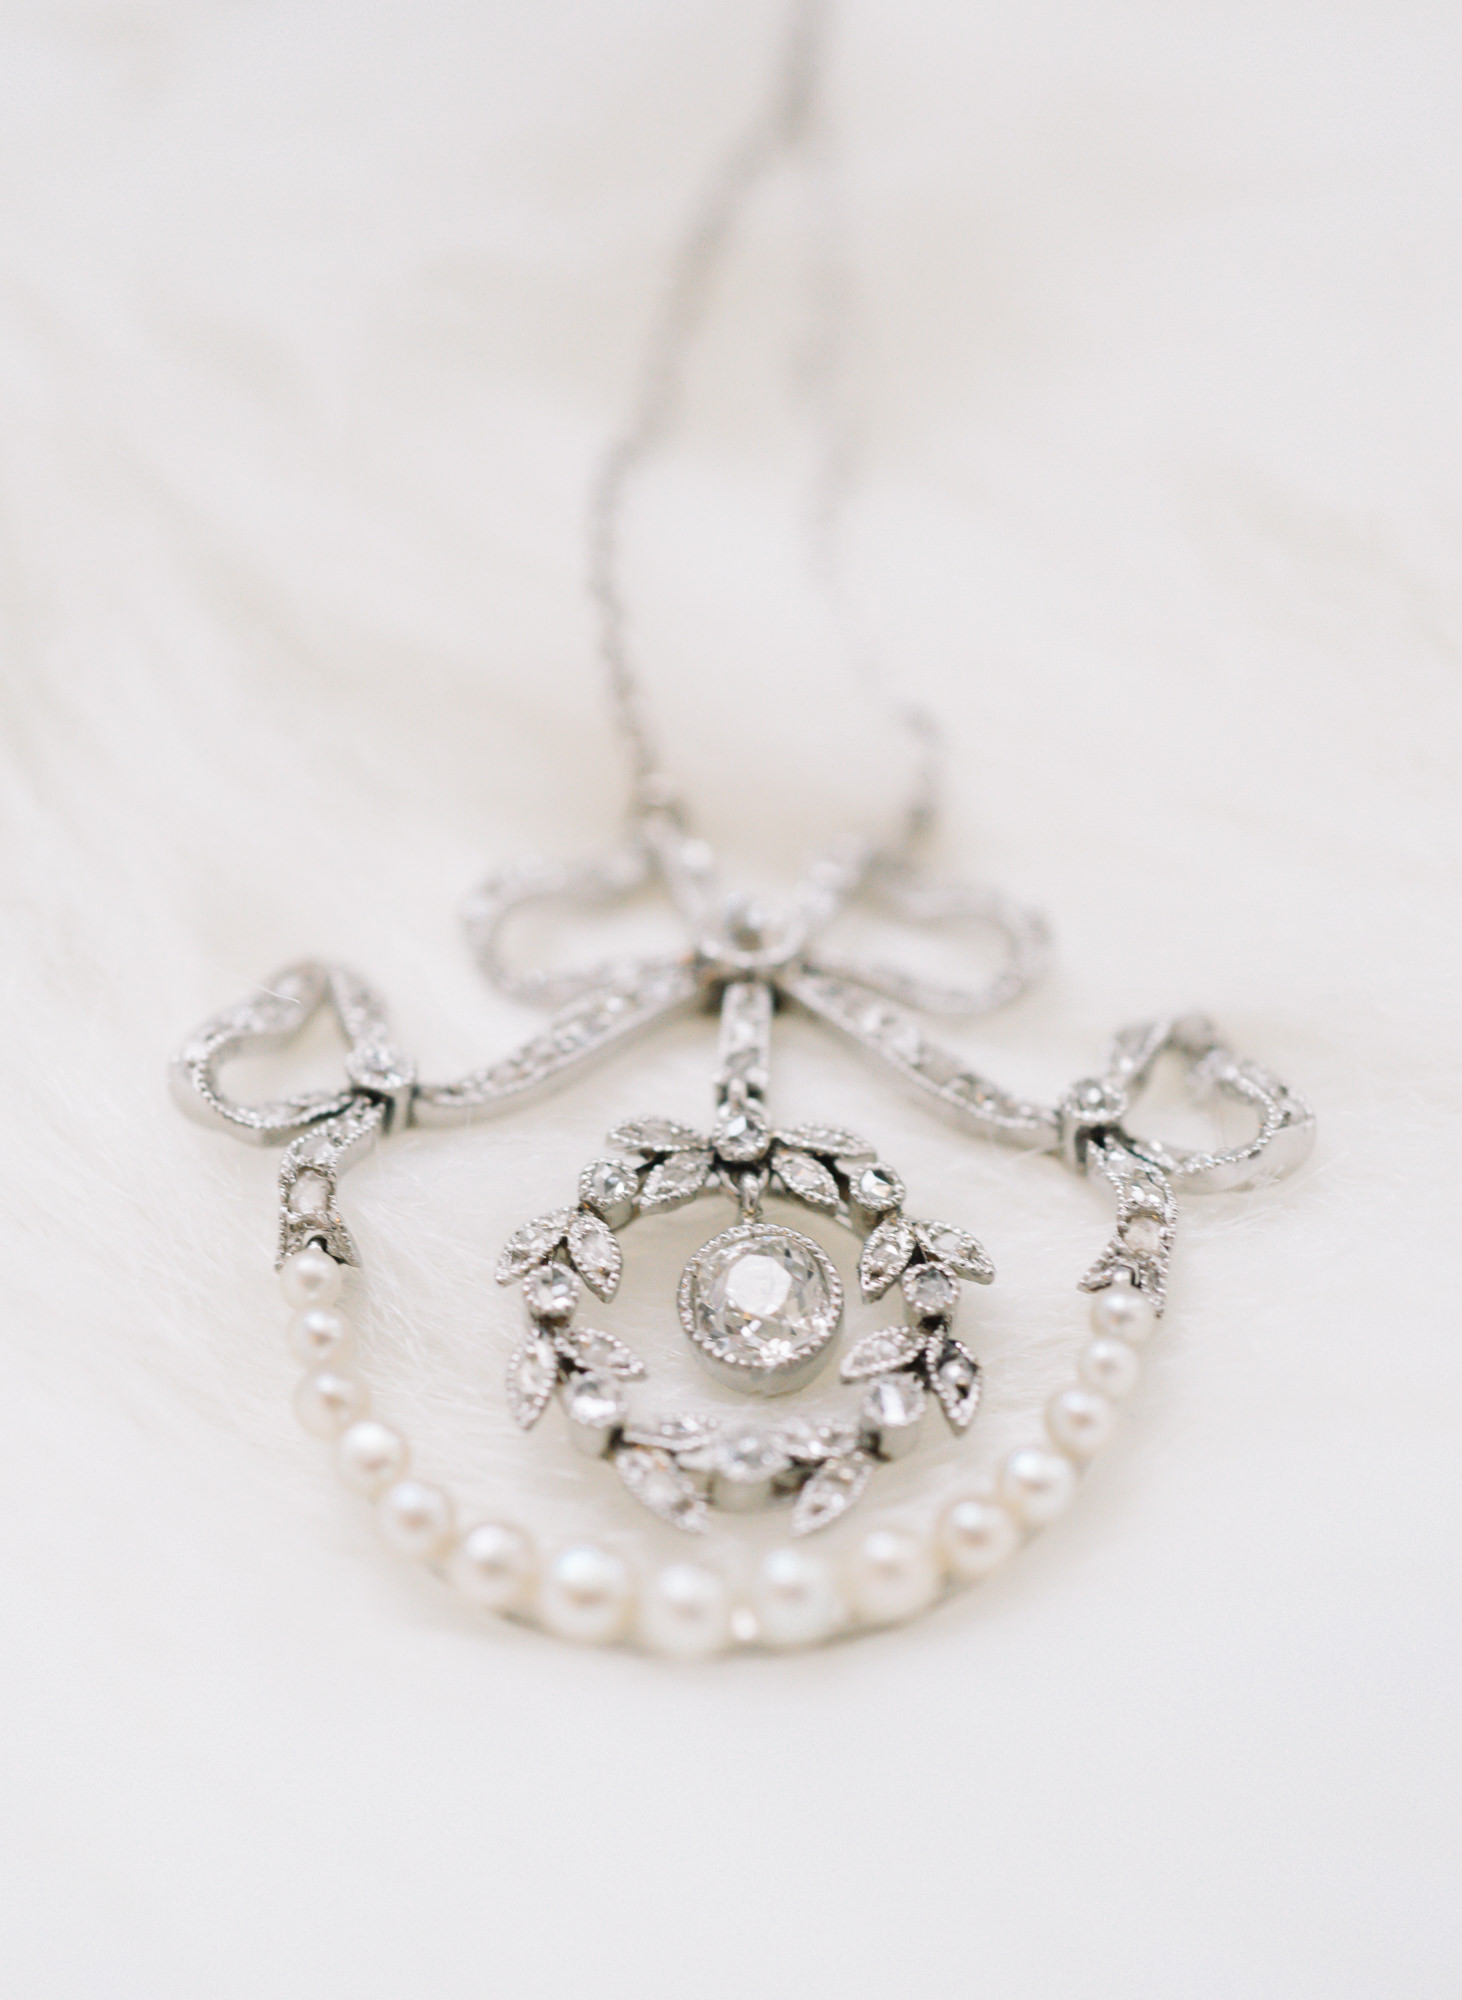 Heirloom diamond and pearl necklace